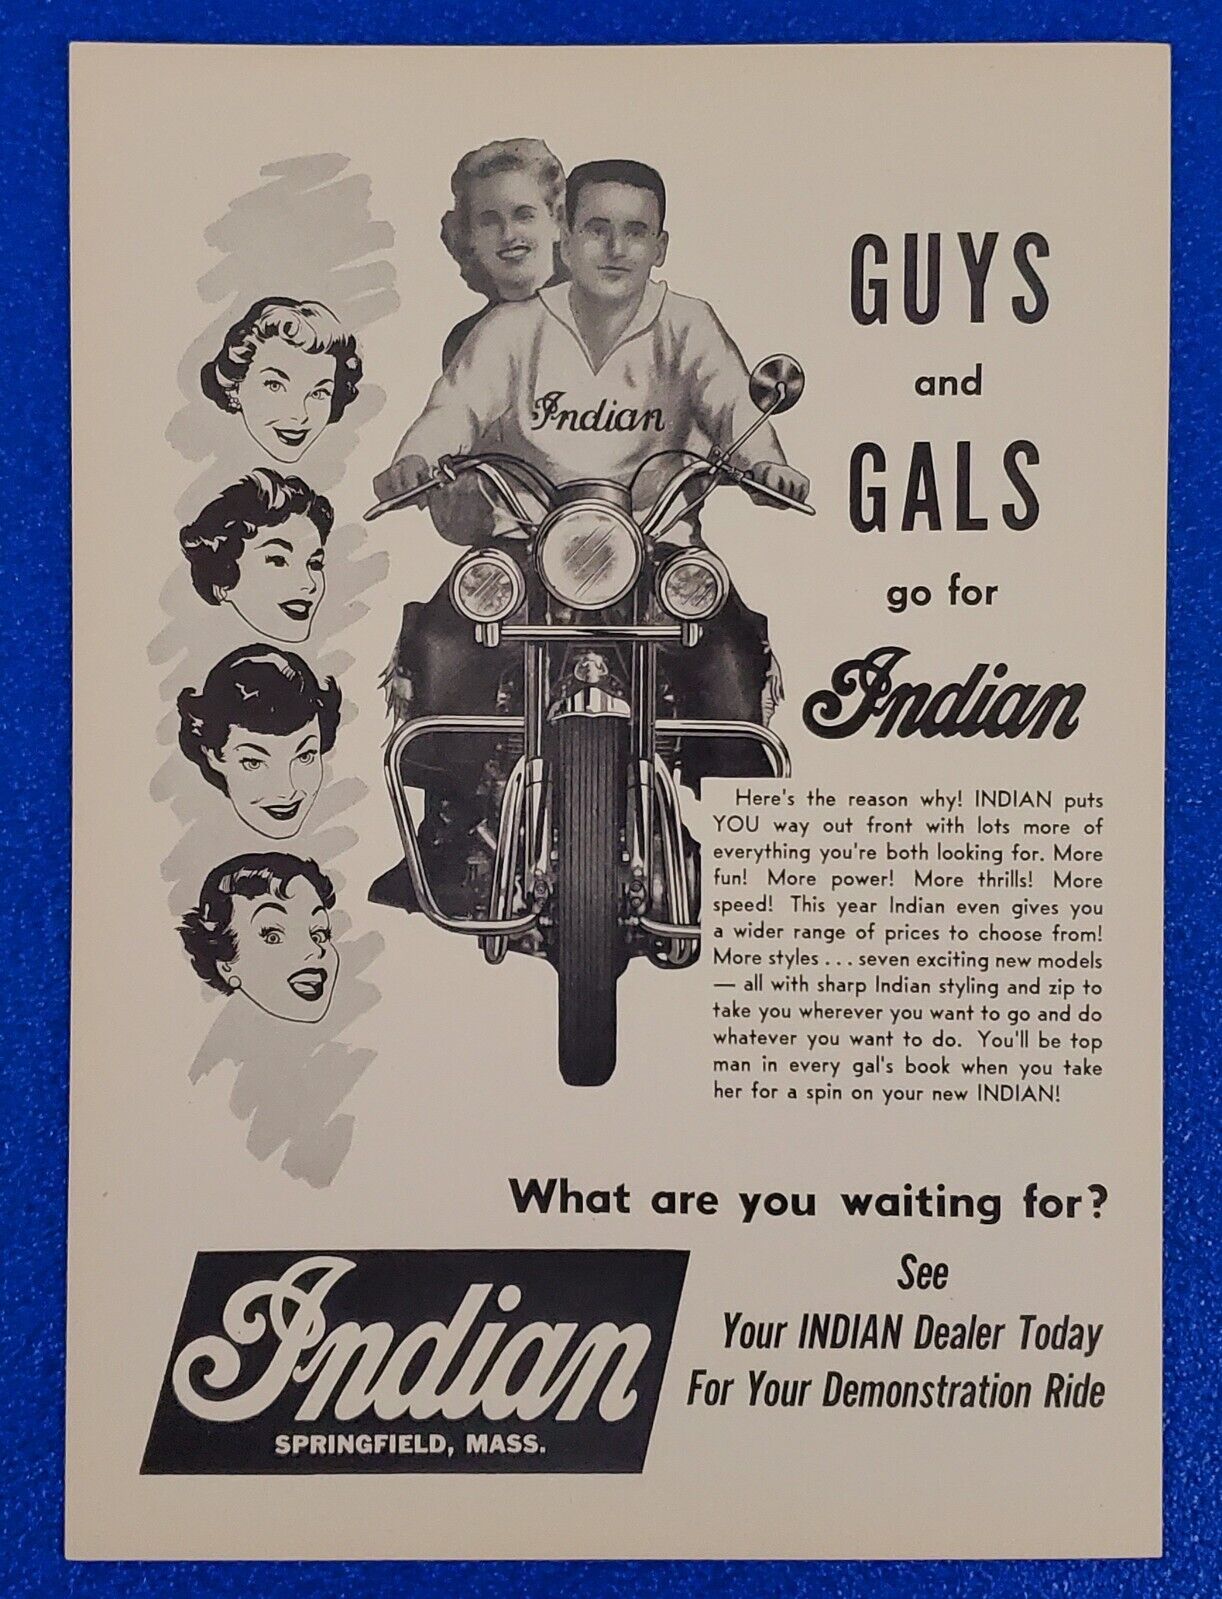 CLASSIC 1958 INDIAN MOTORCYCLE ORIGINAL PRINT AD - GUYS AND GALS GO FOR INDIAN